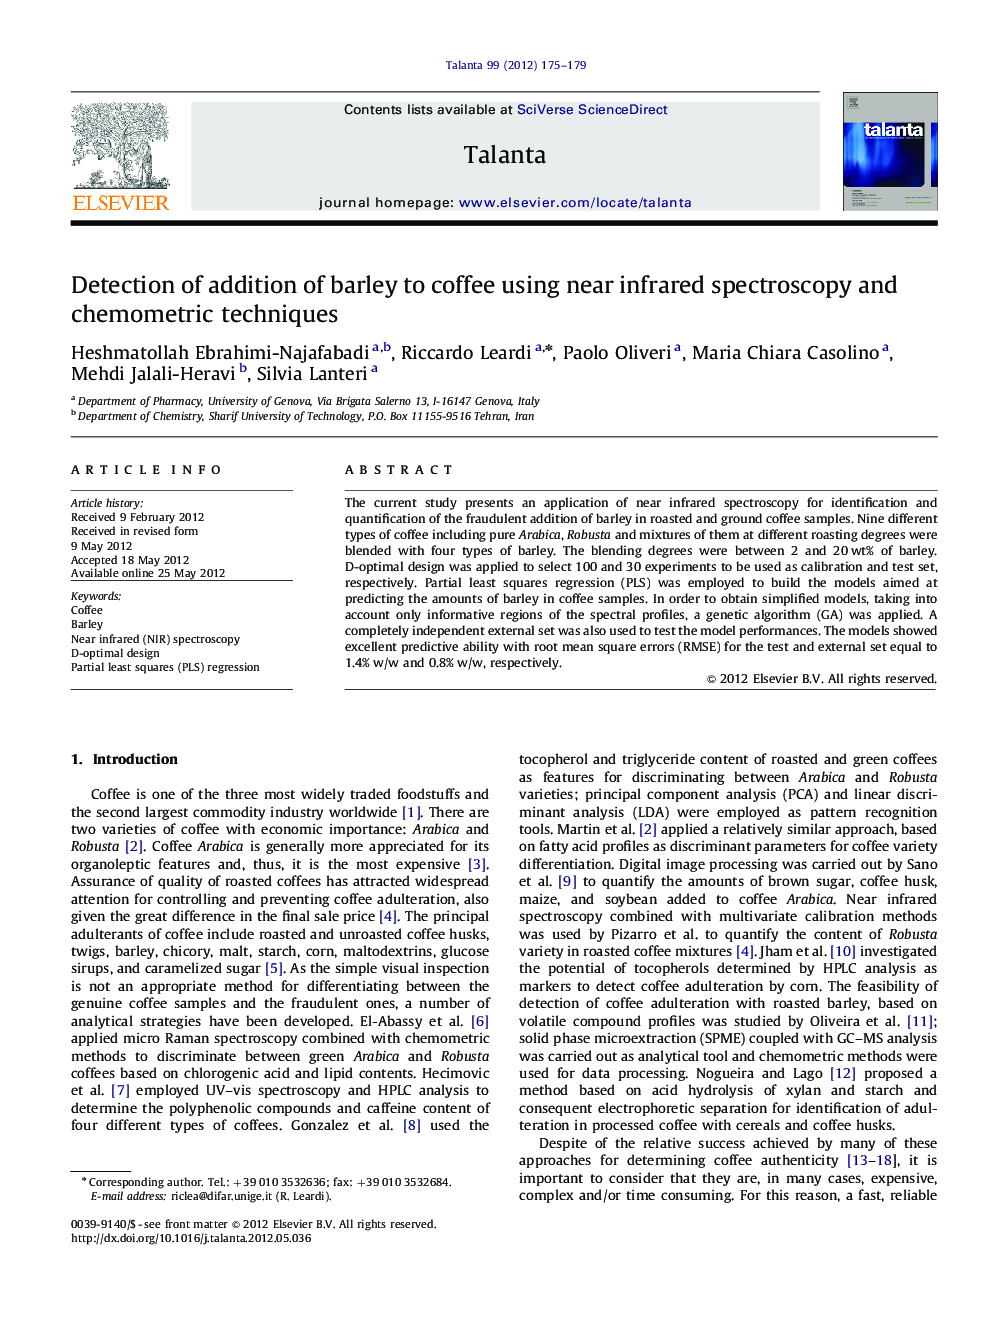 Detection of addition of barley to coffee using near infrared spectroscopy and chemometric techniques